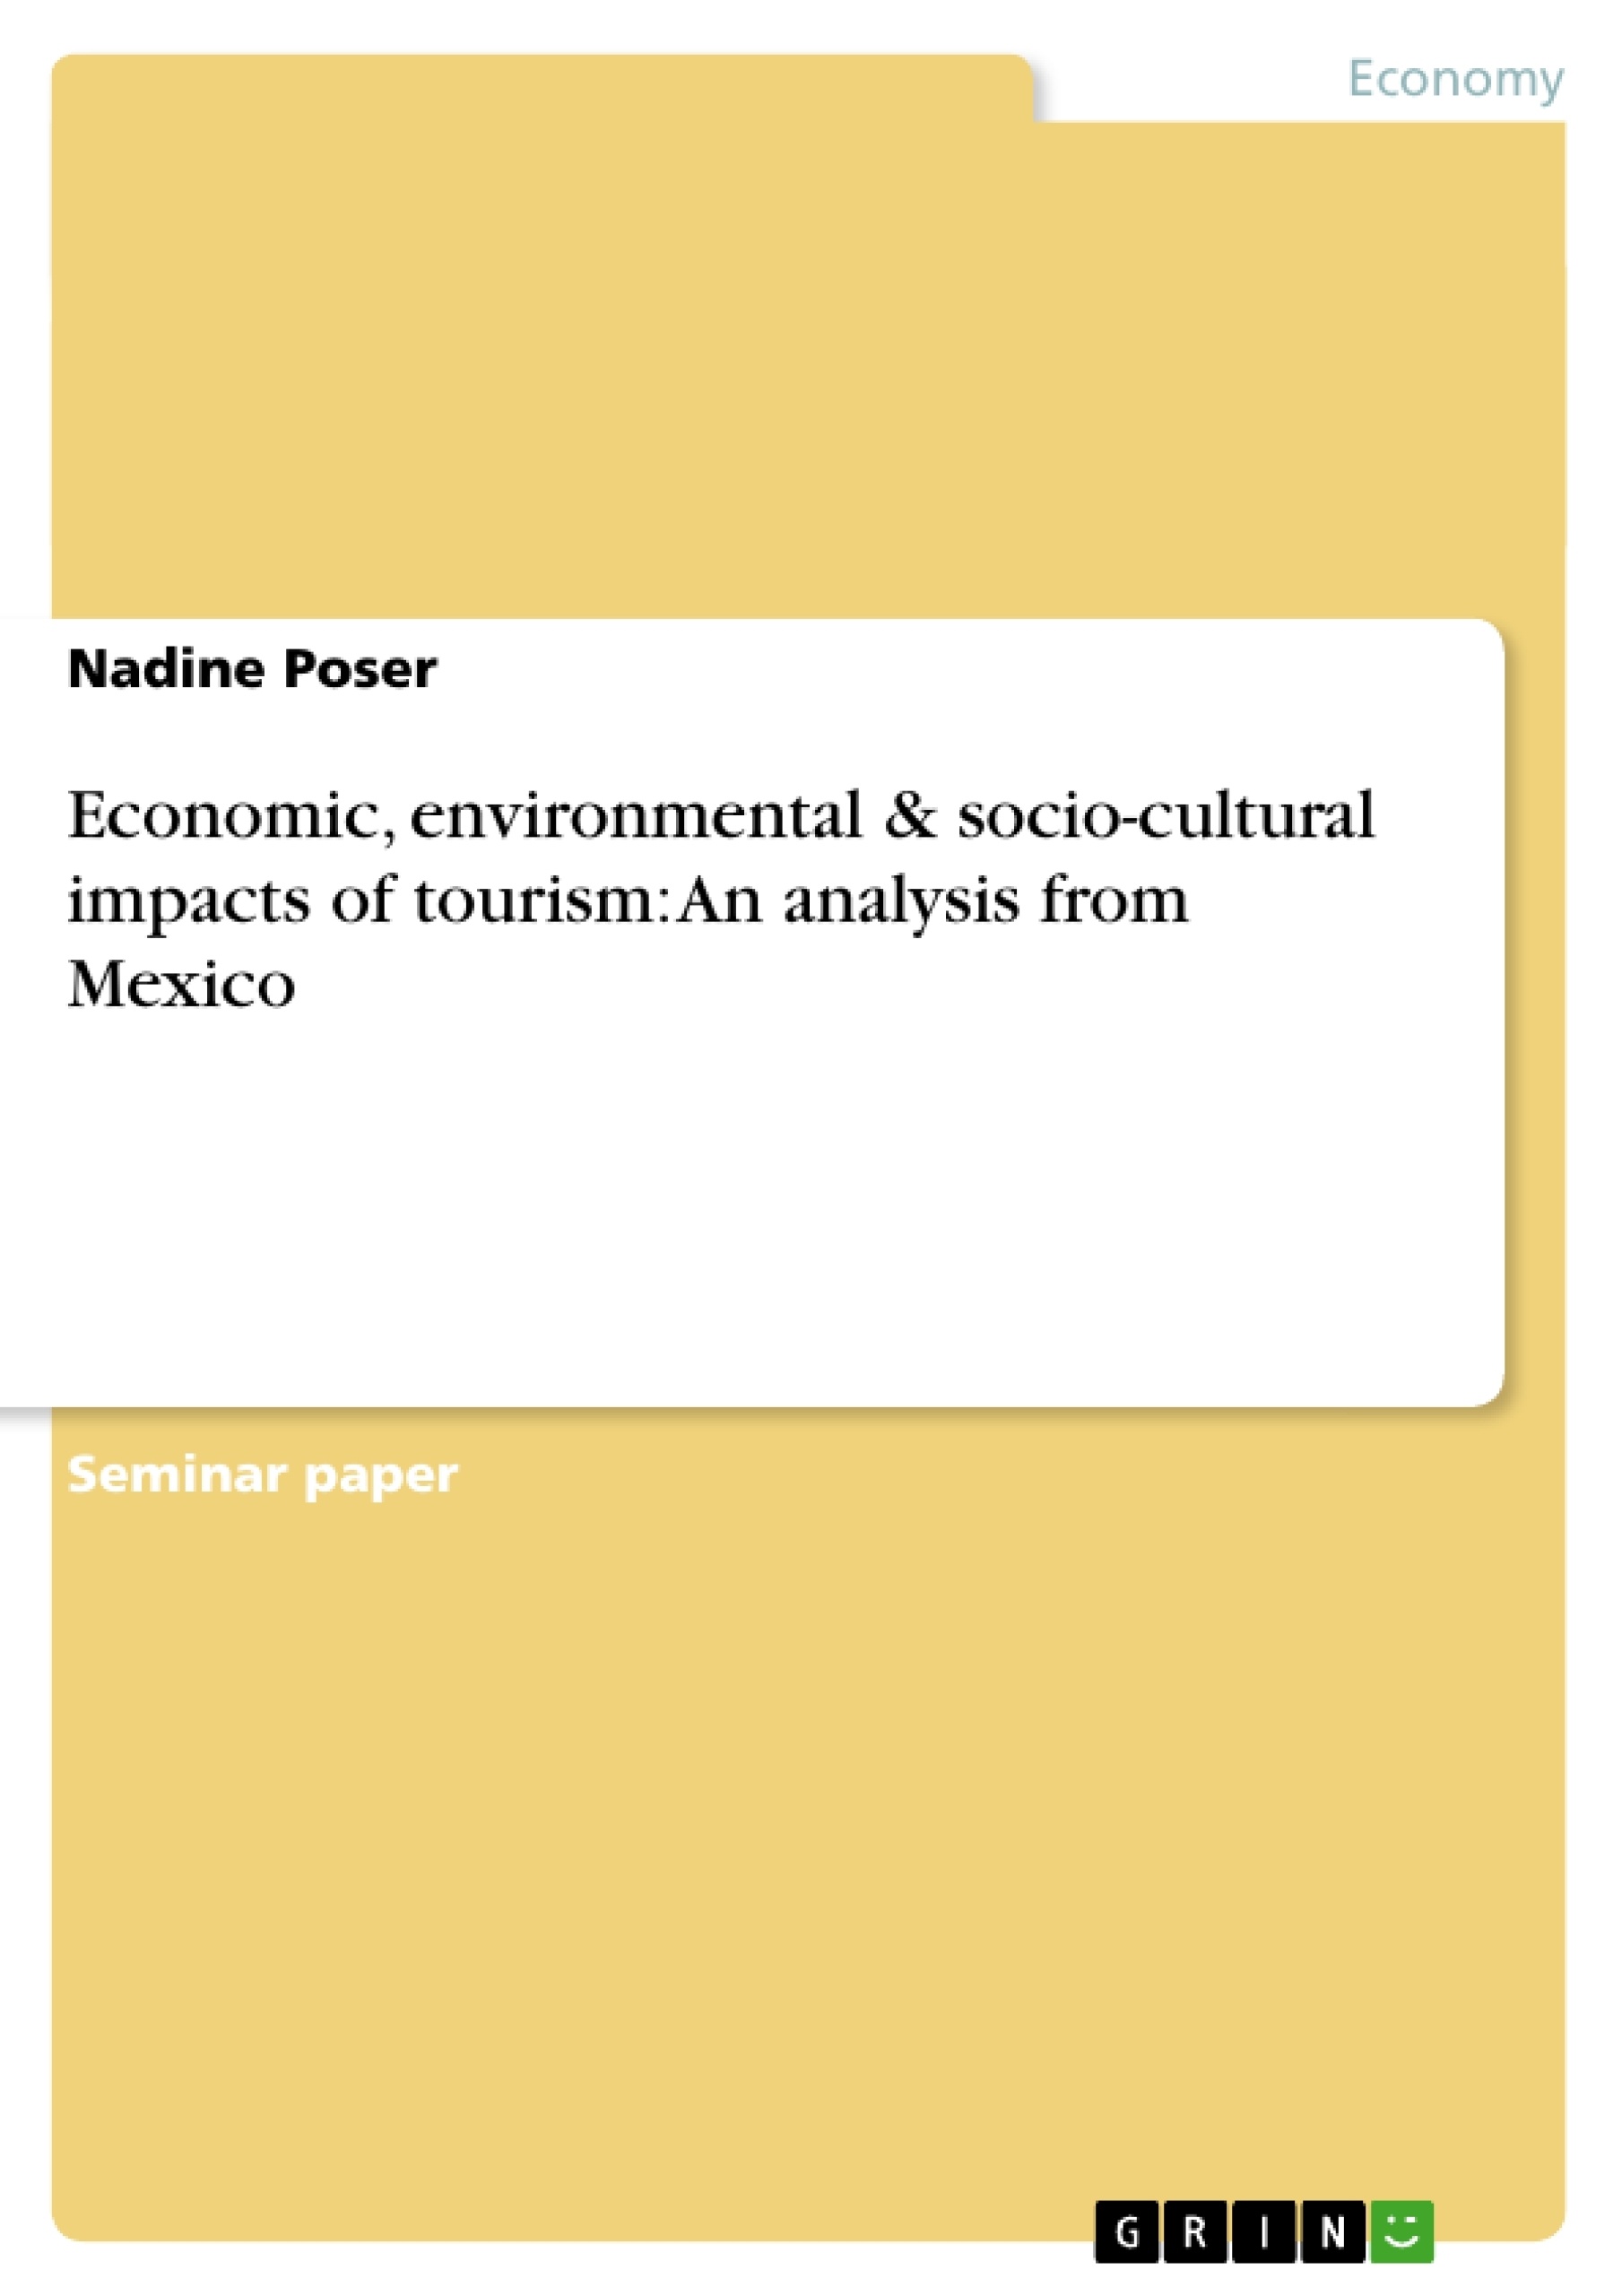 Title: Economic, environmental & socio-cultural impacts of tourism: An analysis from Mexico